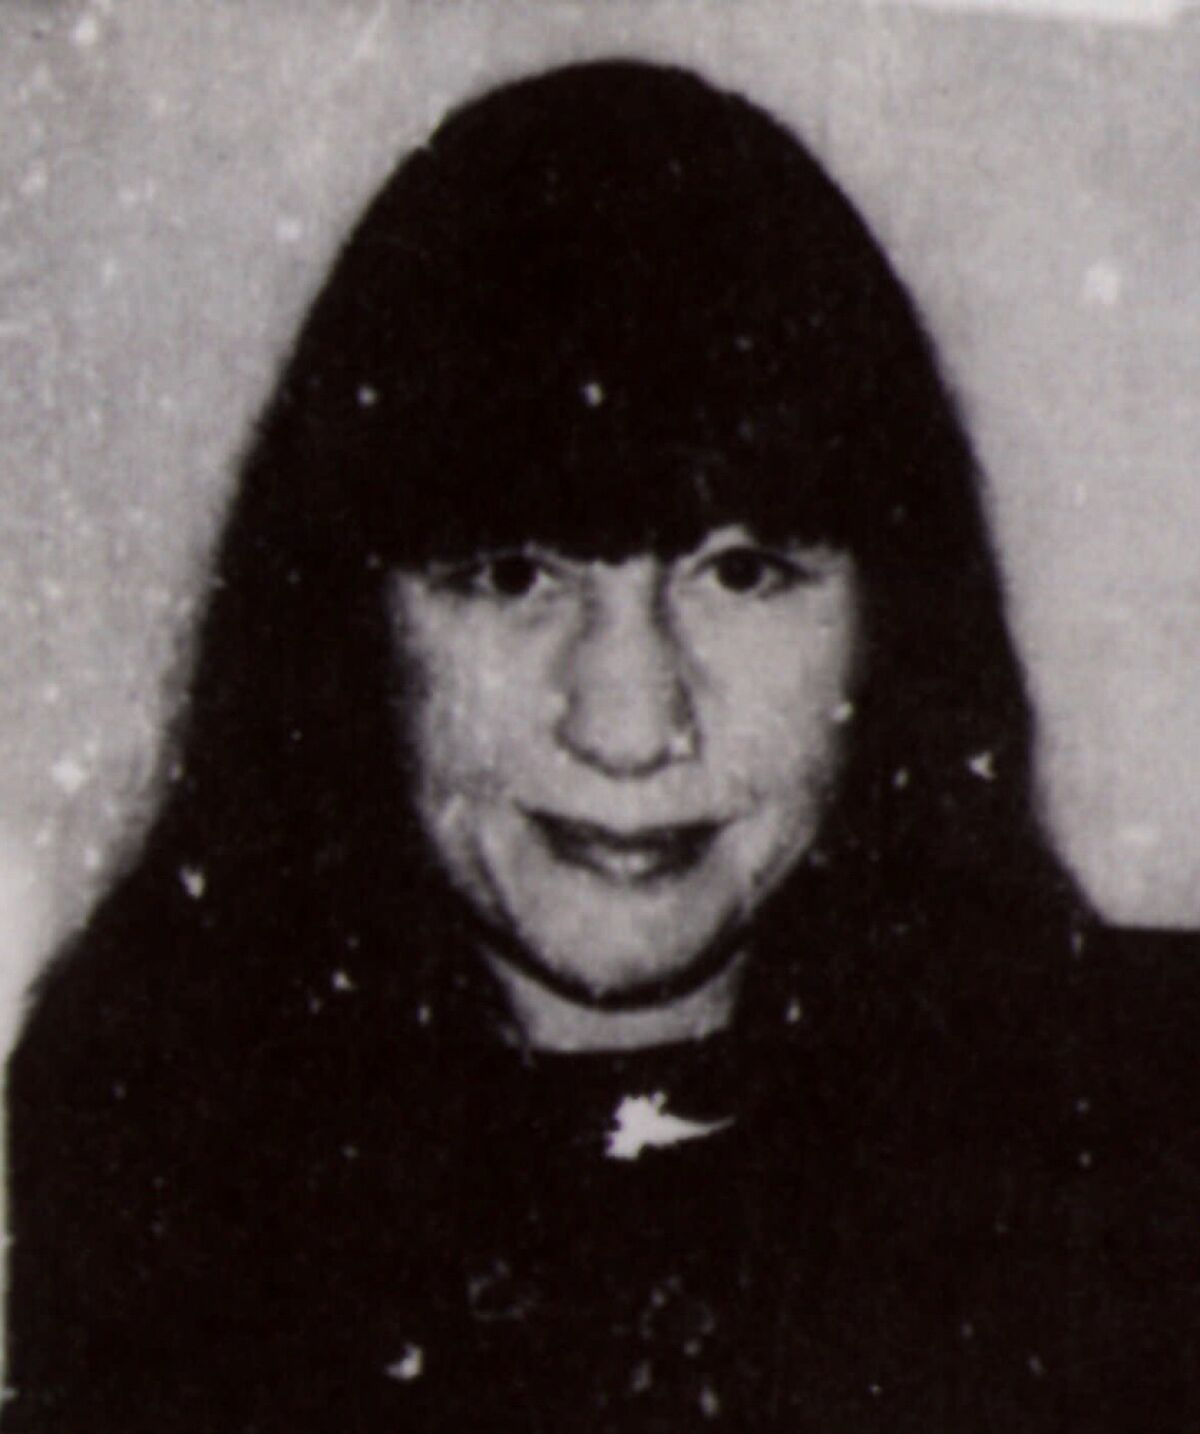 A black and white driver's license photo of Susan Berman